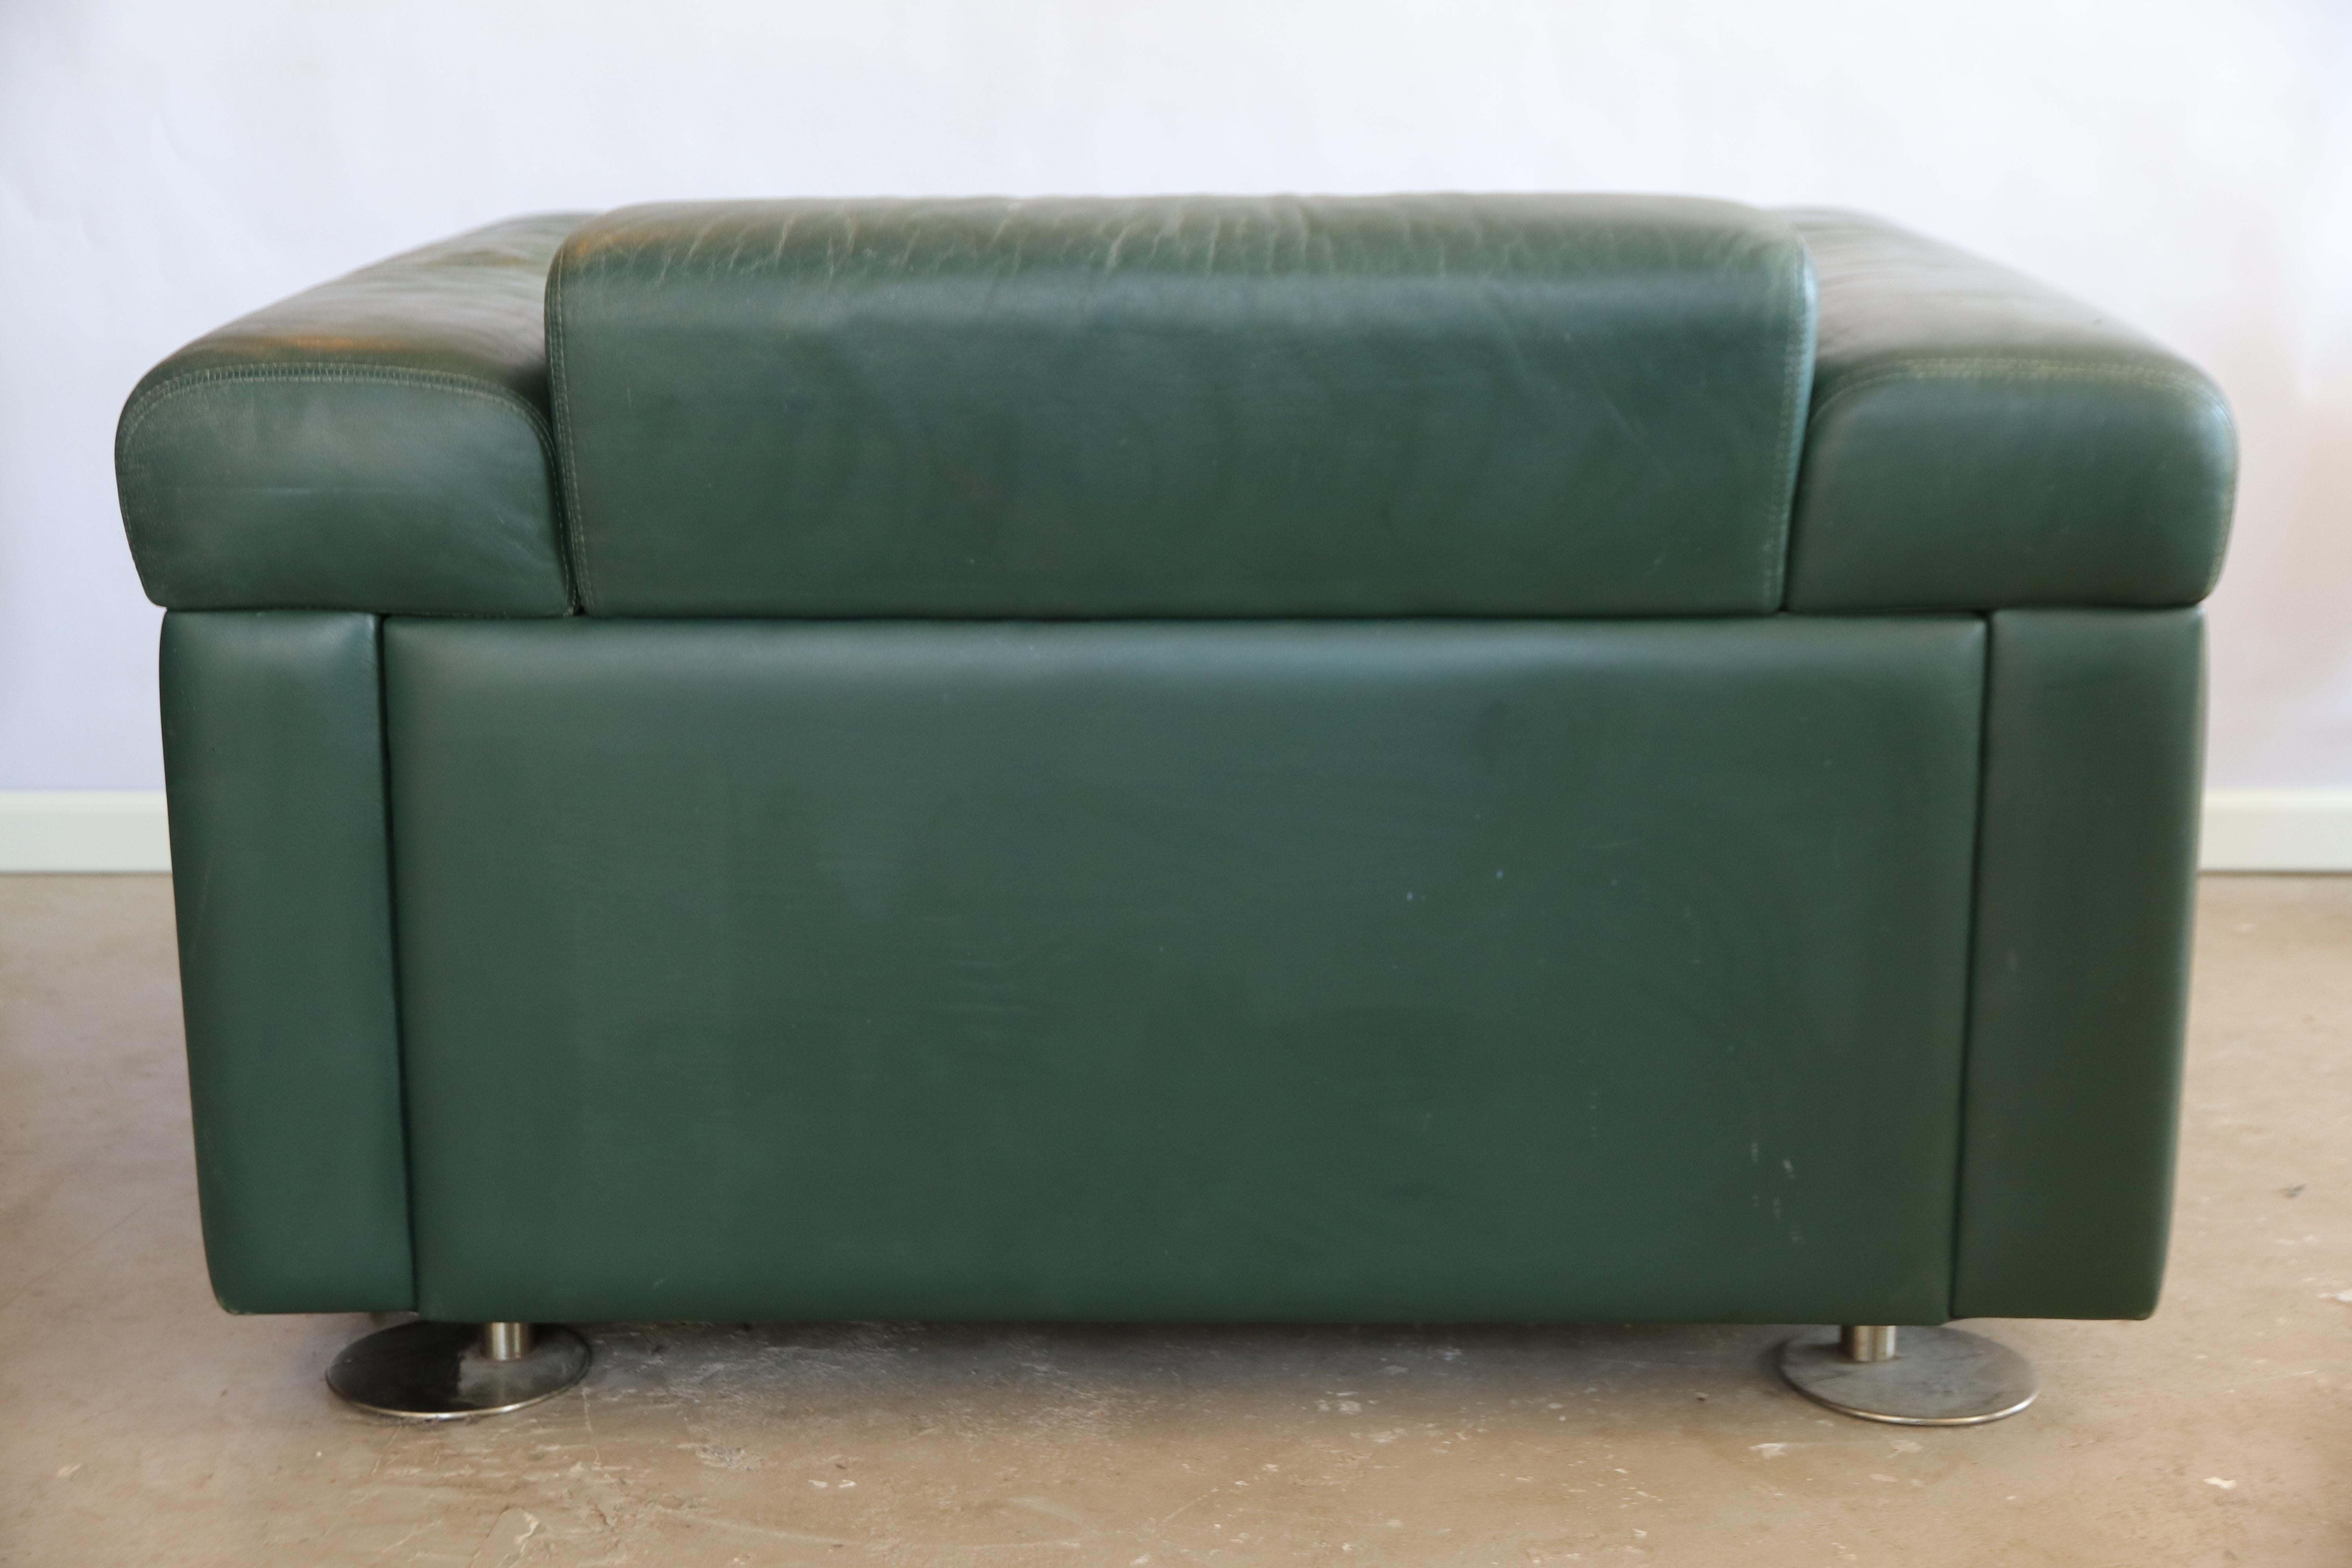 Dyed Valeria Borsani for Tecno Milano Large Lounge Chair Model D120 in Green Leather For Sale